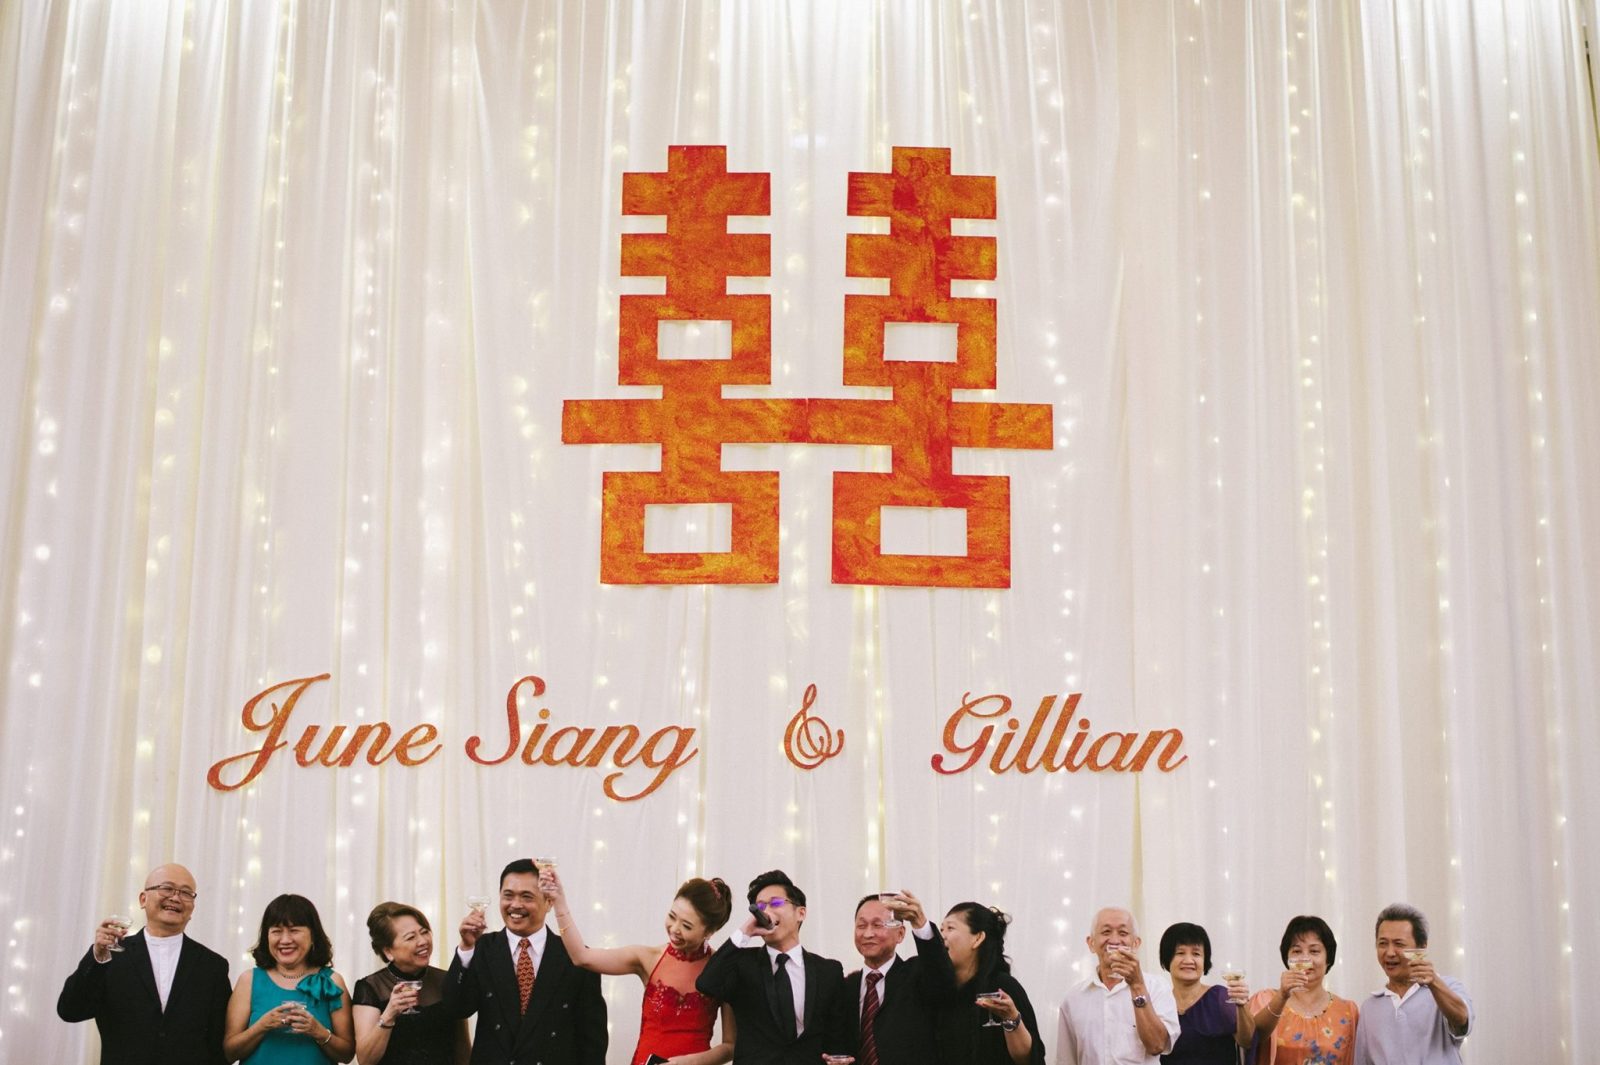 Wedding banquet photography by Irvin Studio